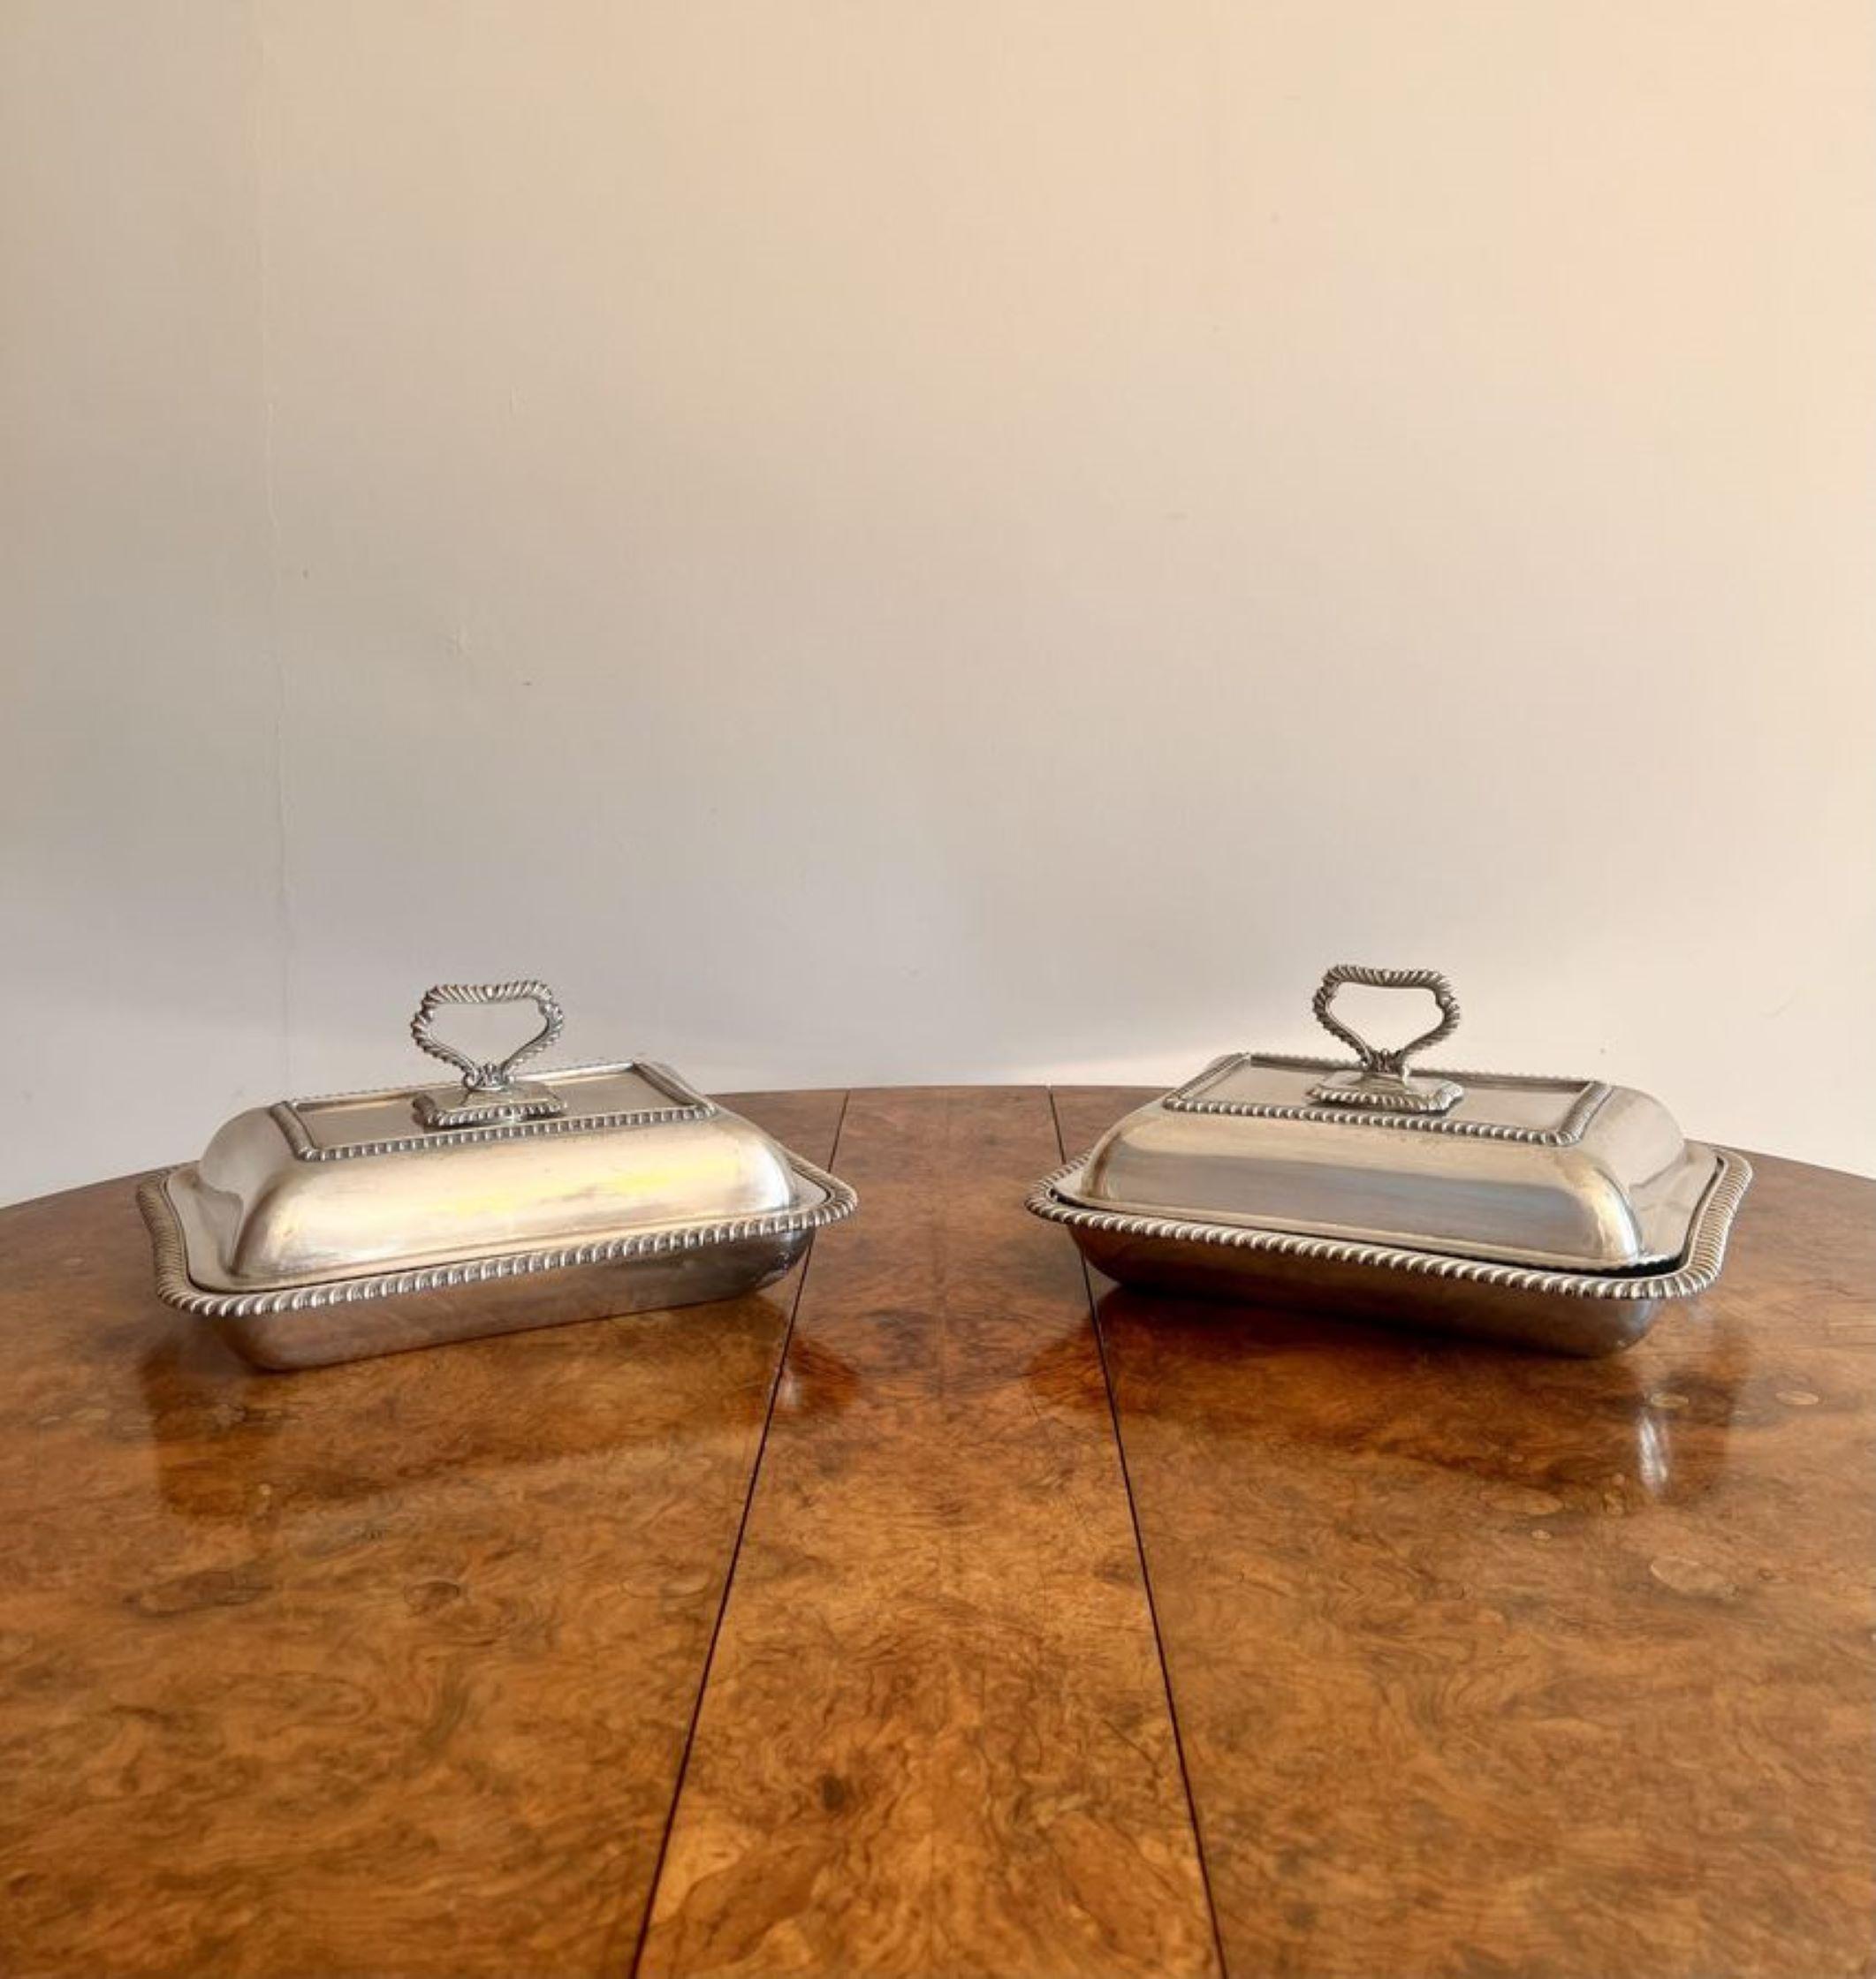 Stunning pair of antique Edwardian silver plated entree dishes having a quality pair of silver plated rectangular entree dishes with removable lids, ornate detail and ornate handles to the top.

D. 1900